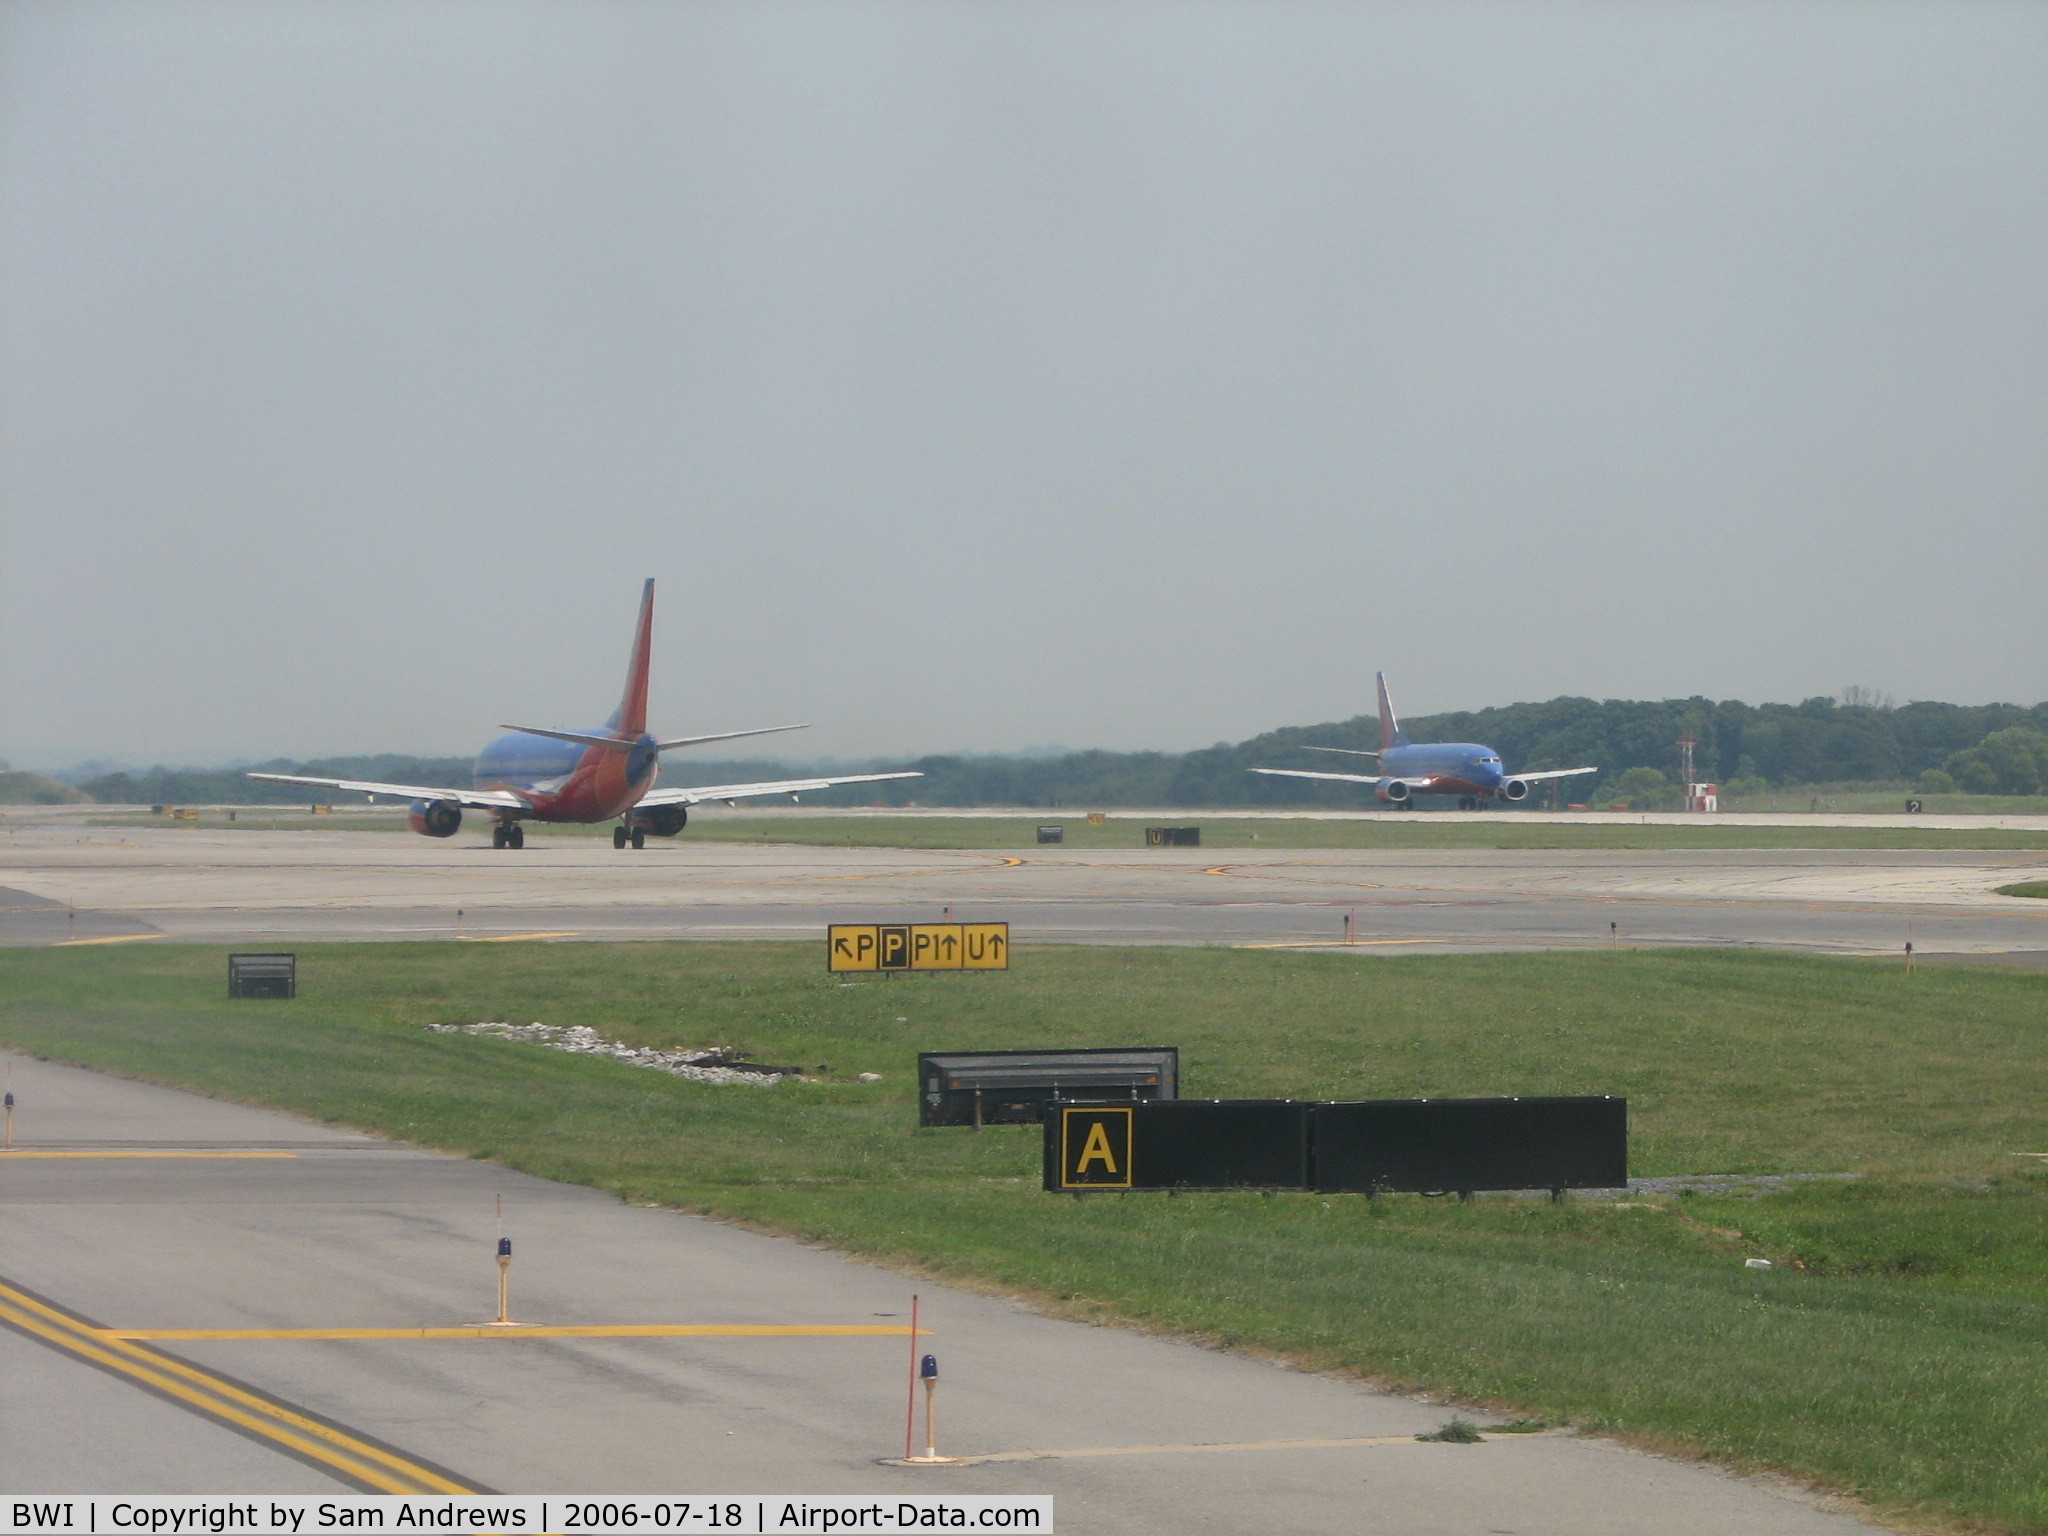 Baltimore/washington International Thurgood Marshal Airport (BWI) - One leaving and one coming.